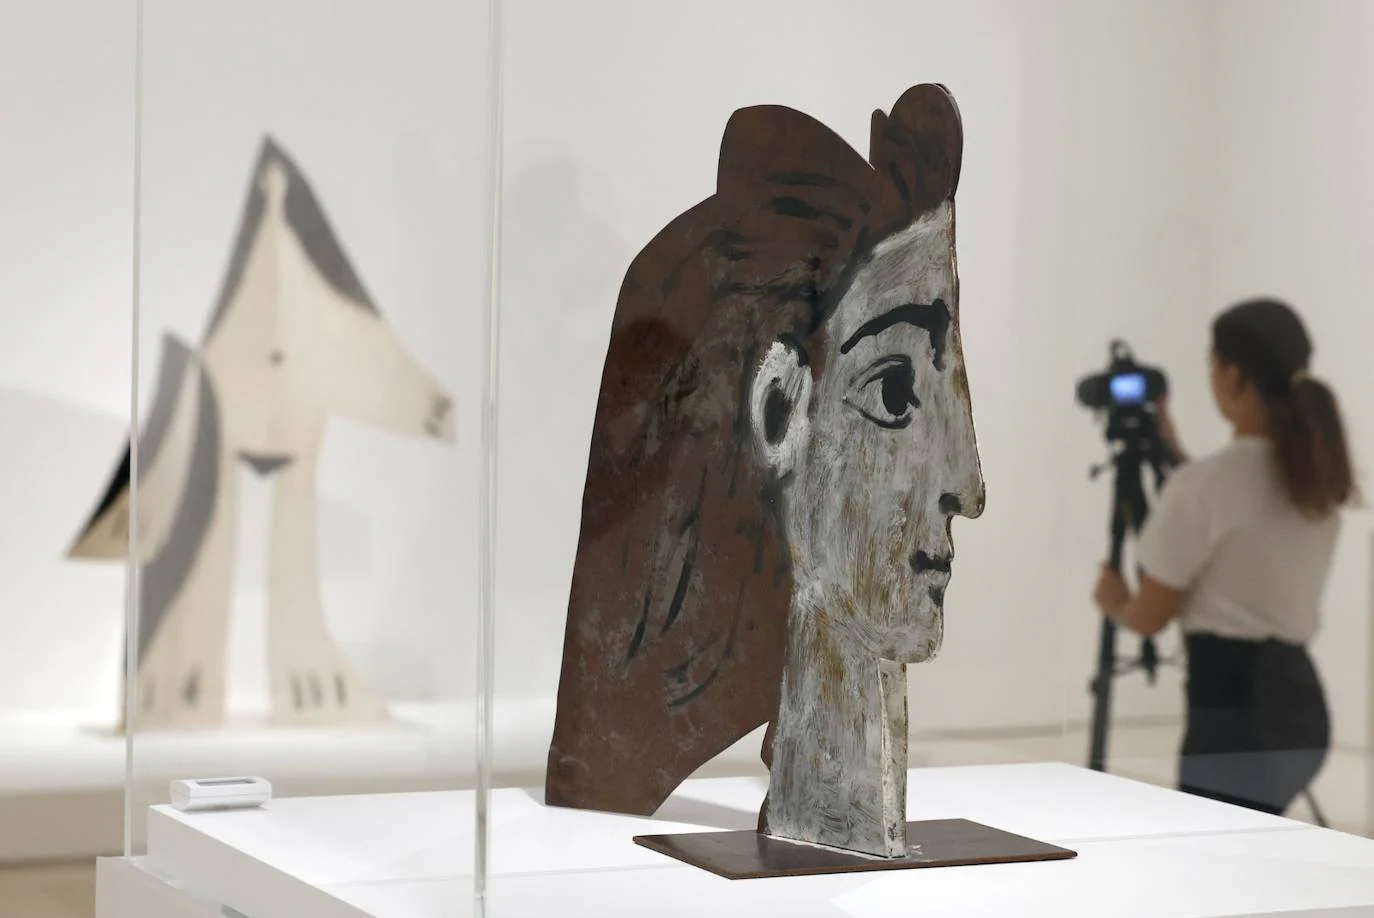 Exhibition of Picasso sculptures opens in Malaga